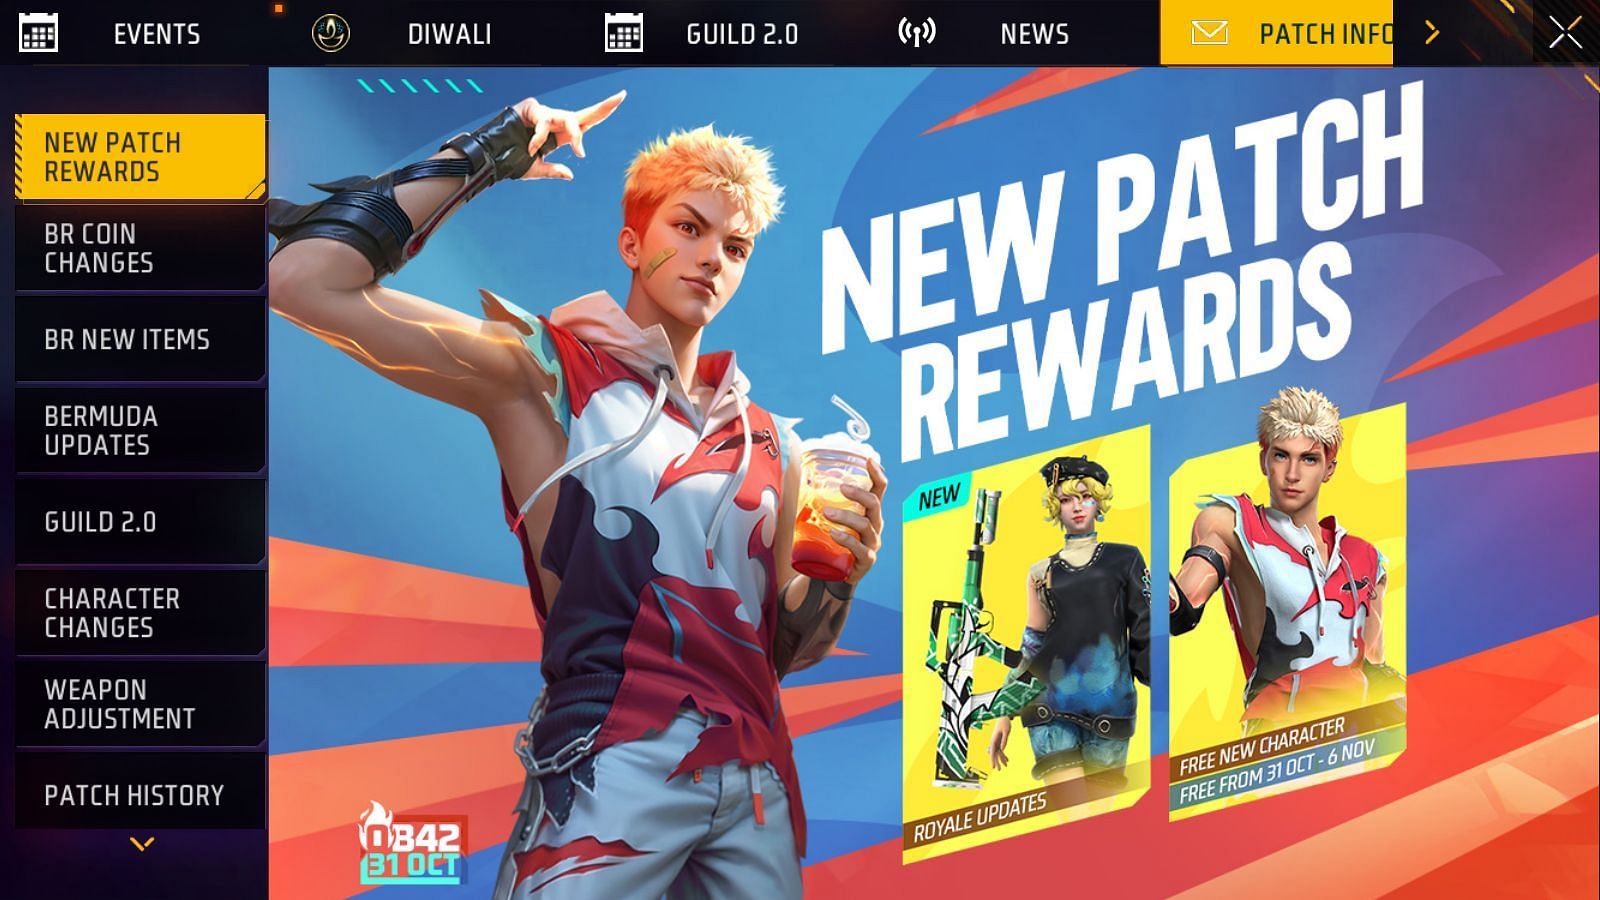 Players will be able to receive multiple free rewards as part of the patch (Image via Garena)